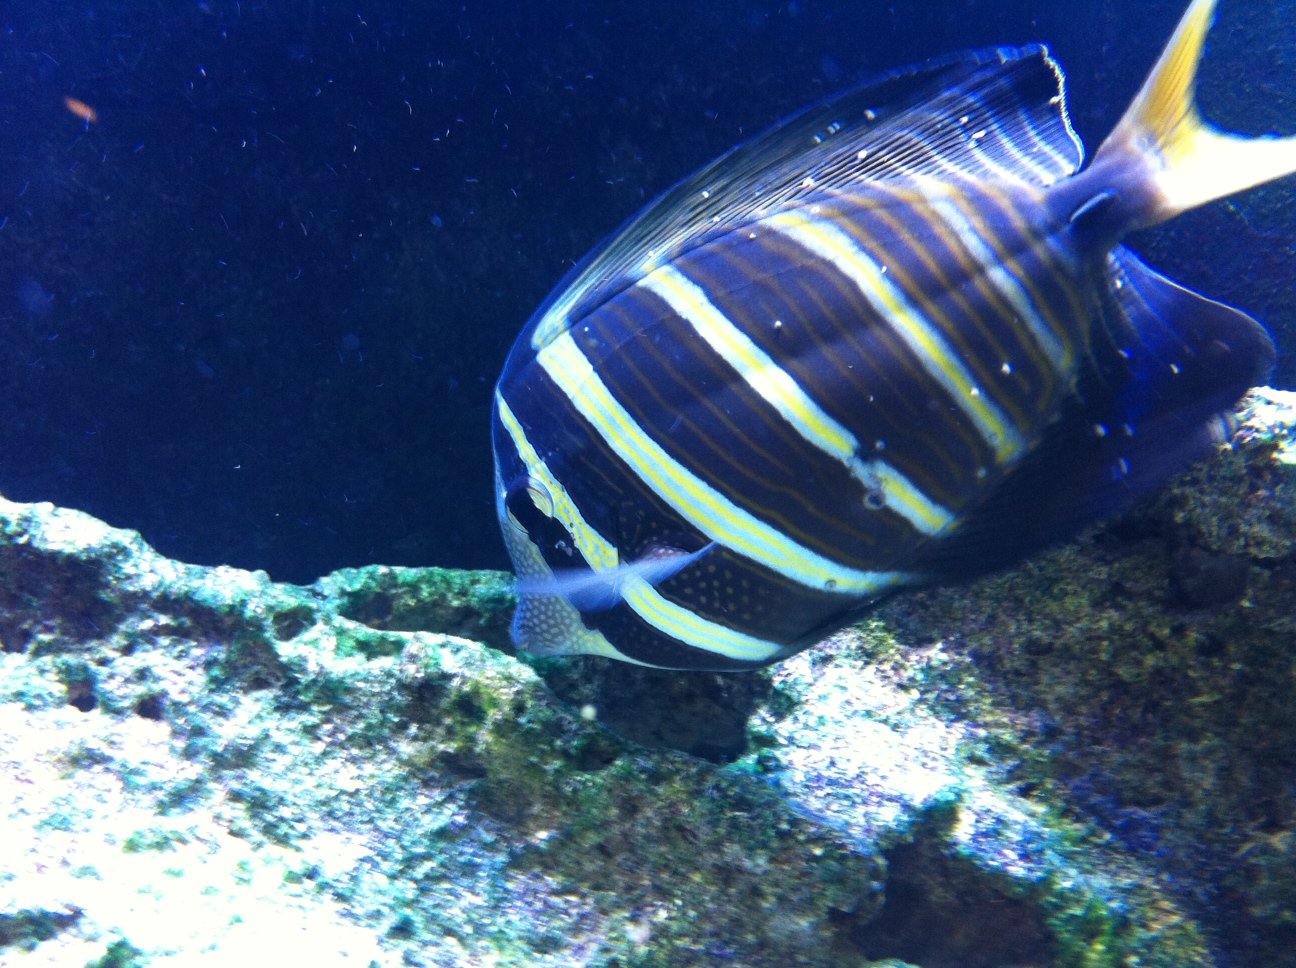 Sailfin Tang has sores and larger than ich white spots